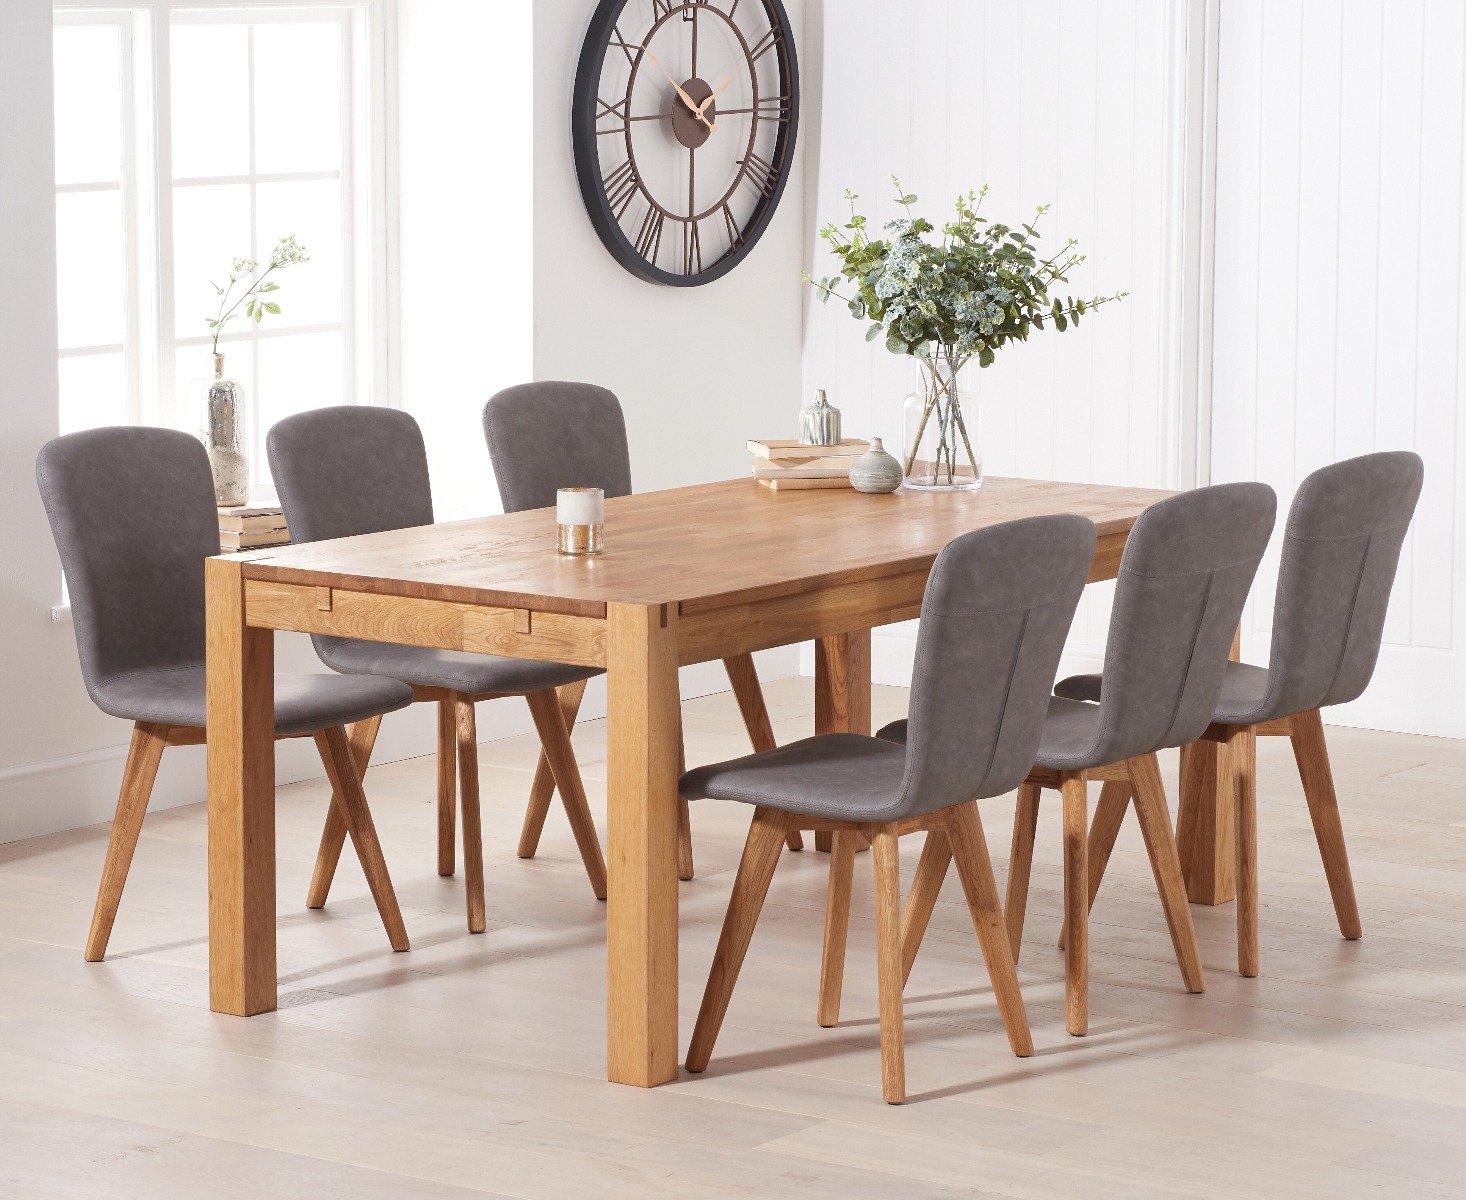 Photo 1 of Thetford 150cm oak dining table with 6 grey ruben chairs